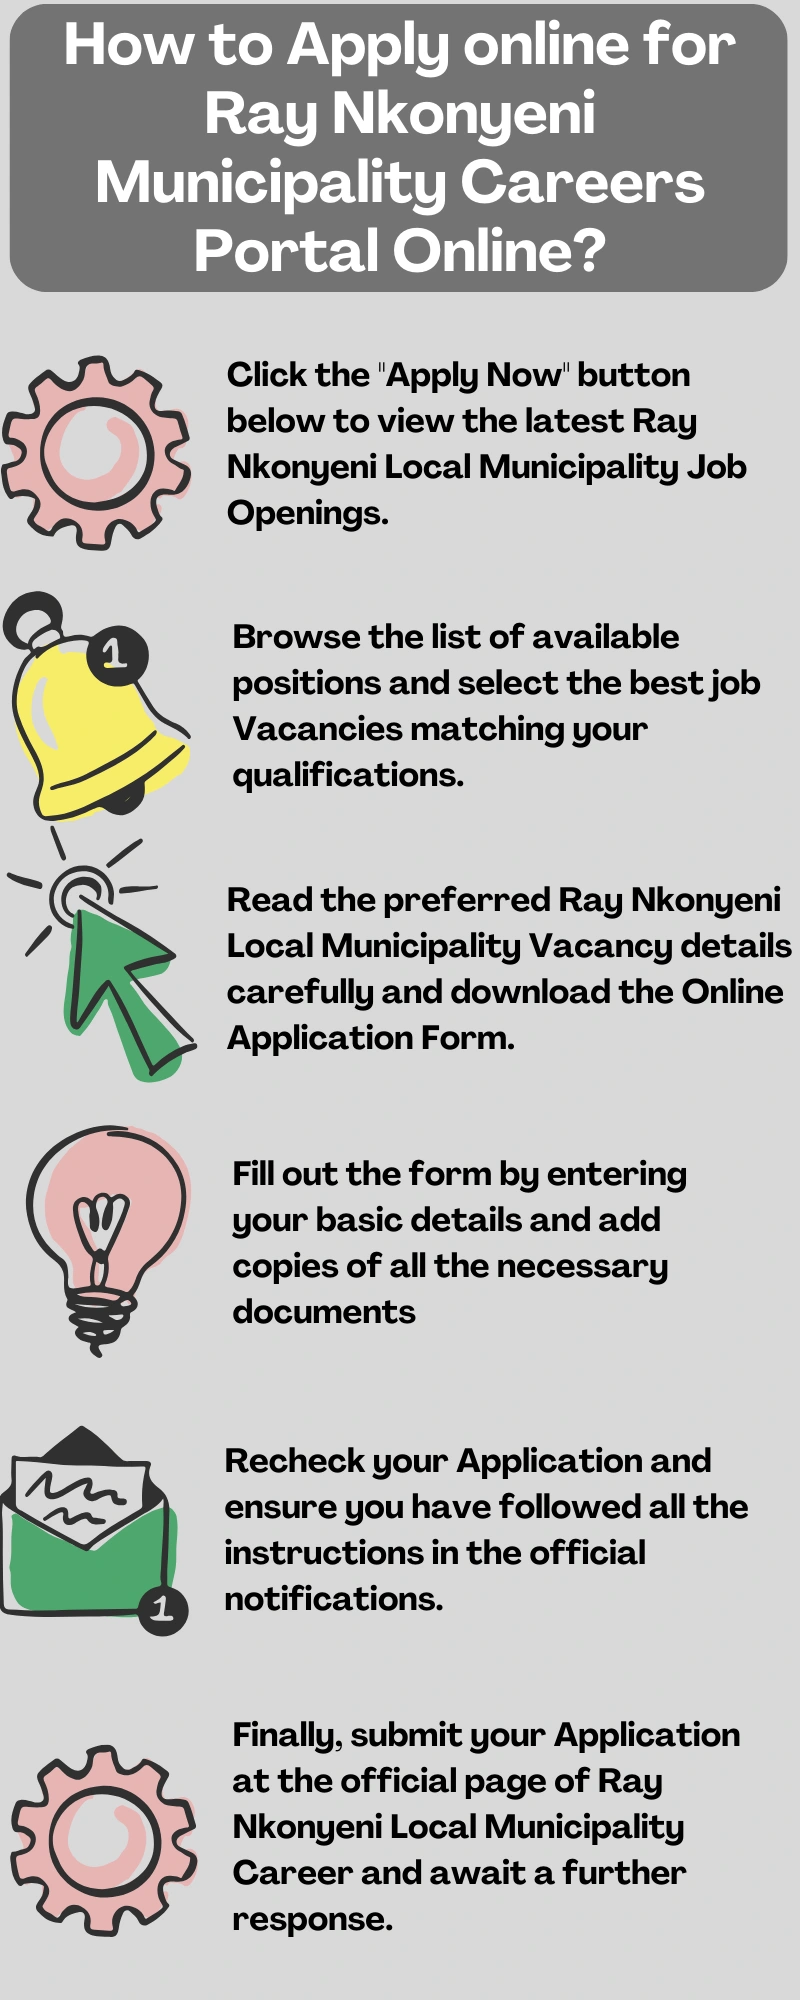 How to Apply online for Ray Nkonyeni Municipality Careers Portal Online?